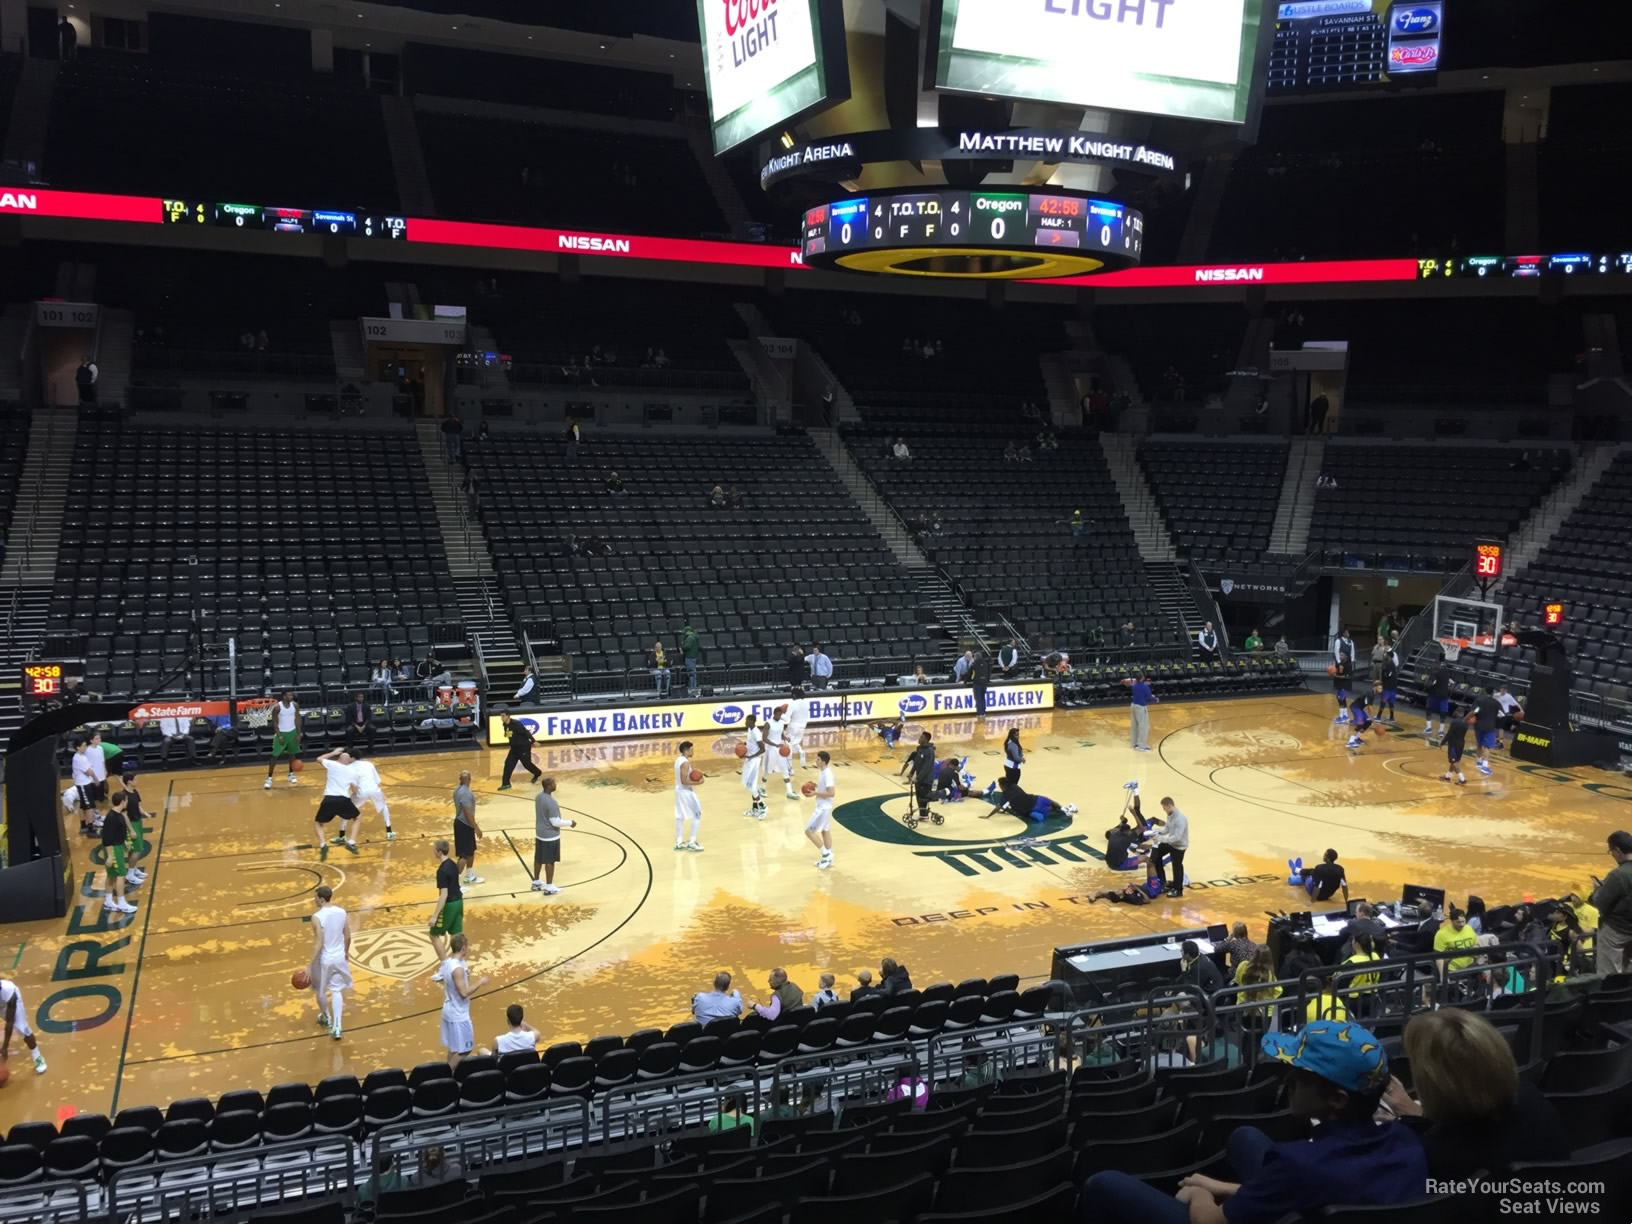 section 113, row k seat view  - matthew knight arena